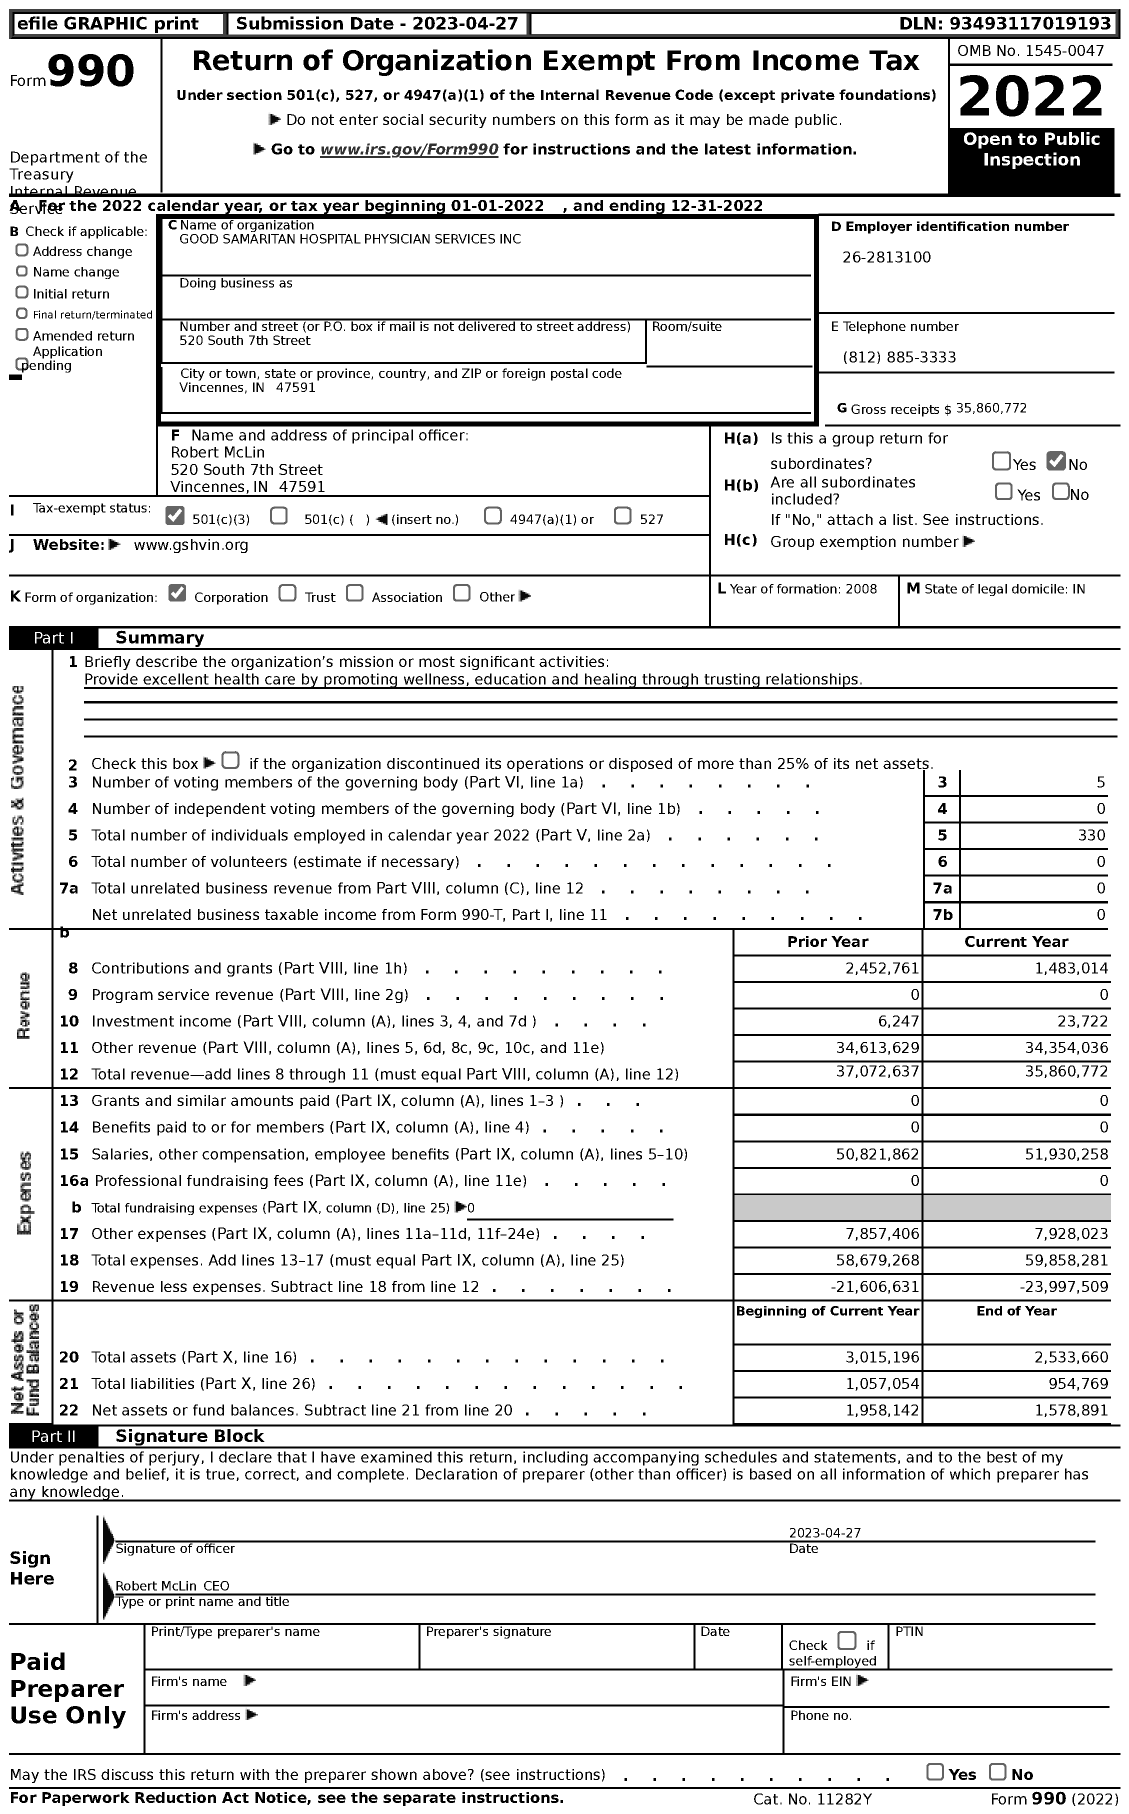 Image of first page of 2022 Form 990 for Good Samaritan Hospital Physician Services